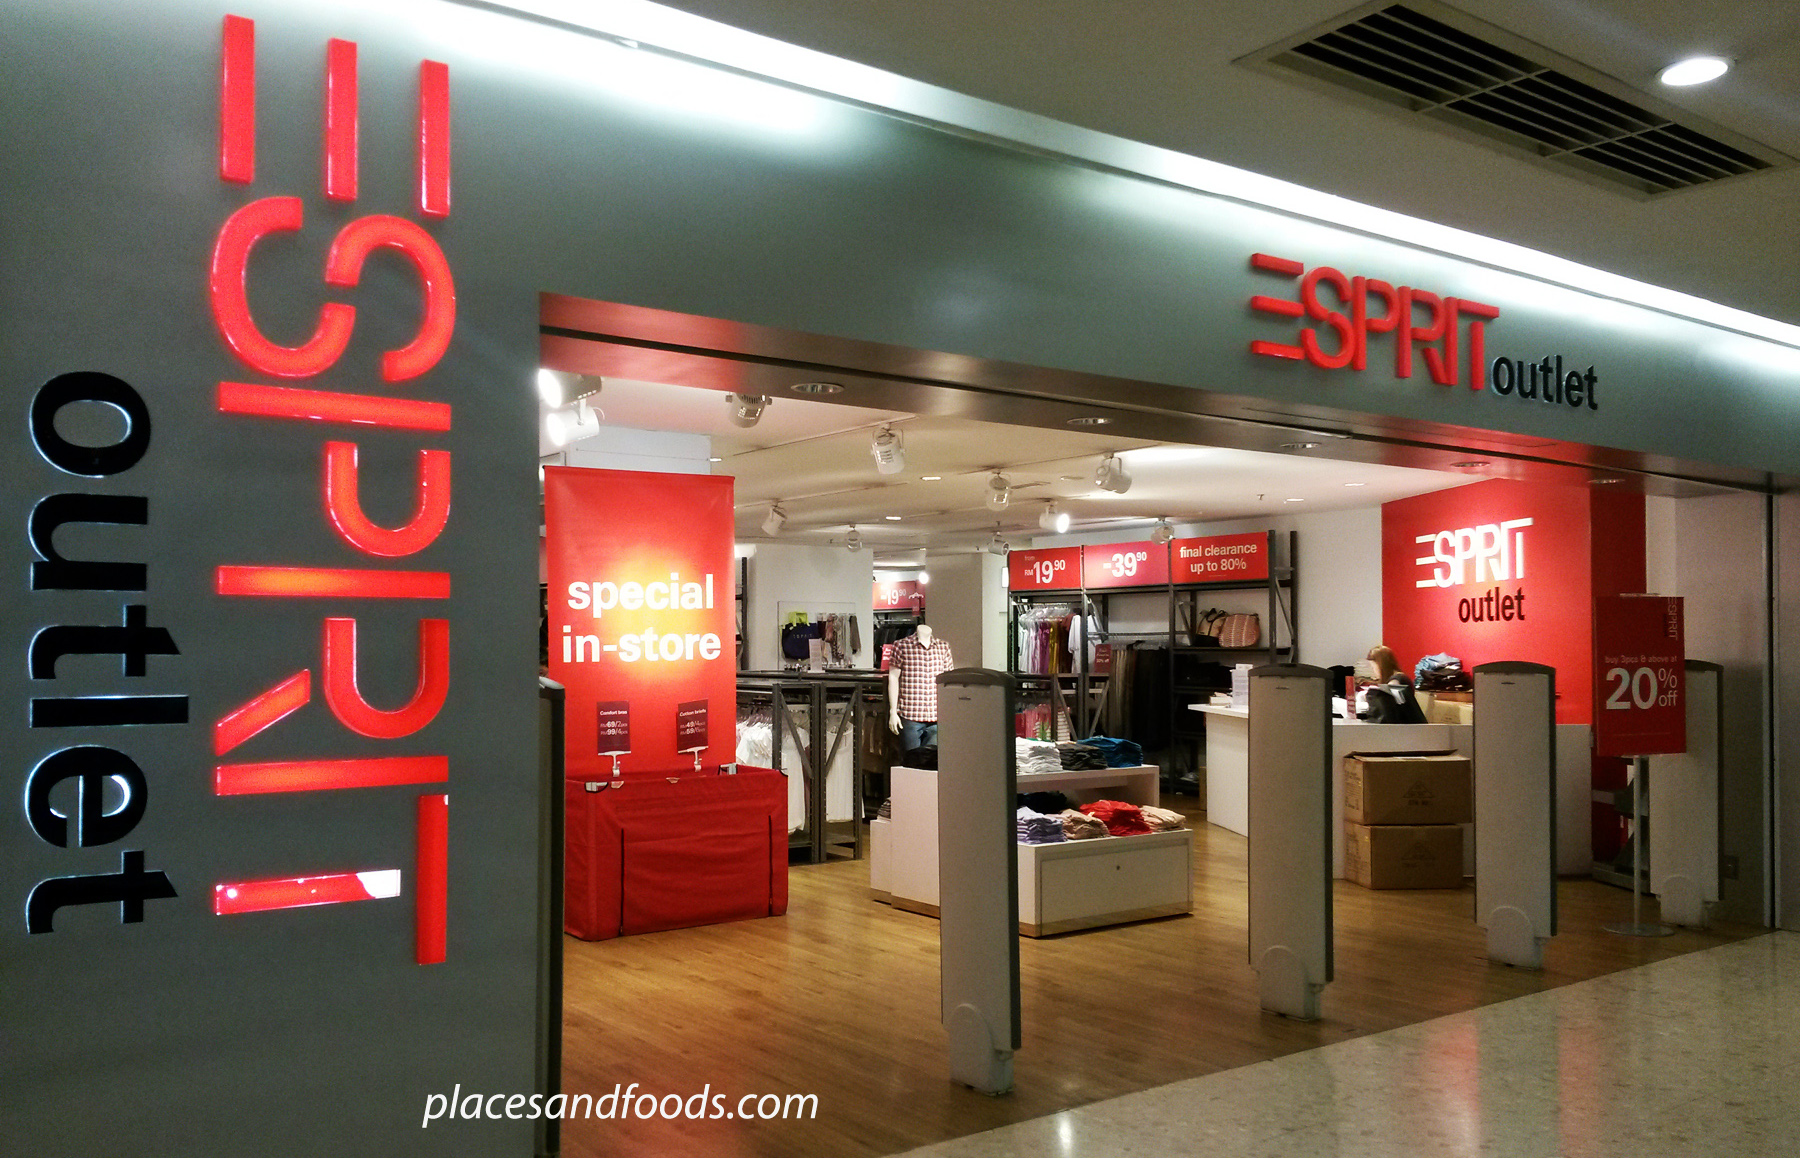 Esprit, Levi’s and Quiksilver Outlets in Kuala Lumpur